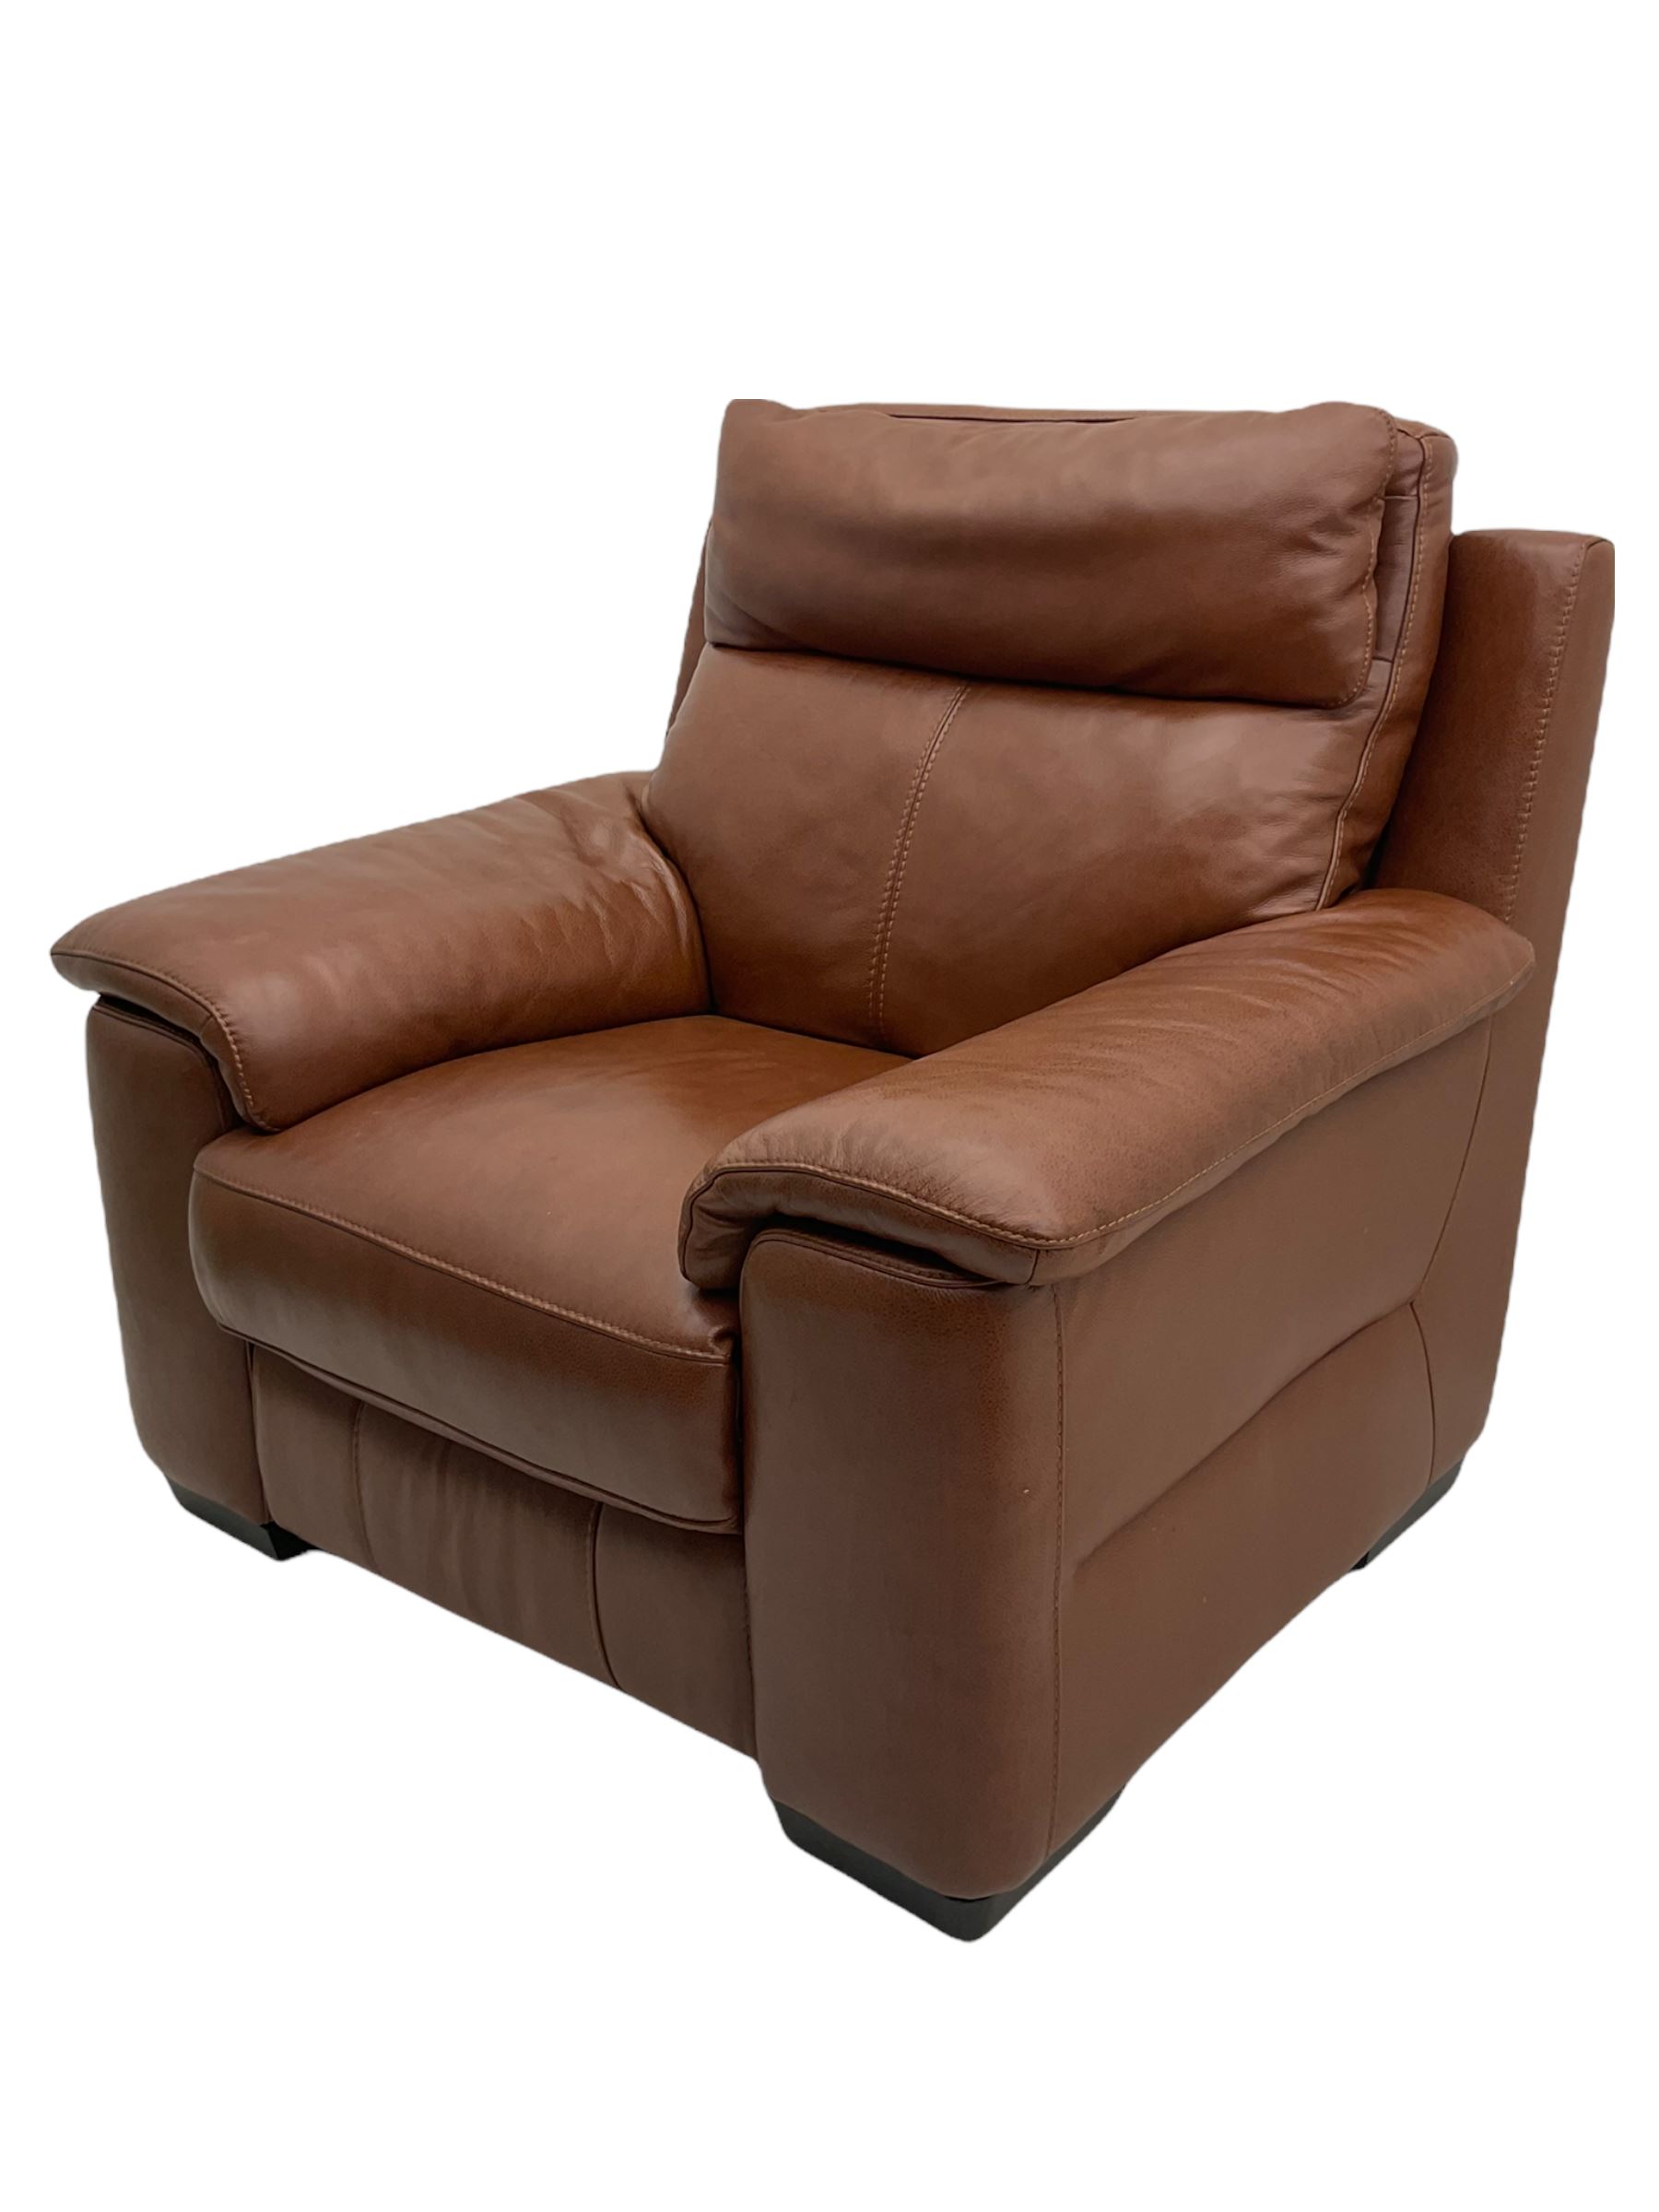 Three electric reclining sofa upholstered in tan leather - Image 11 of 23